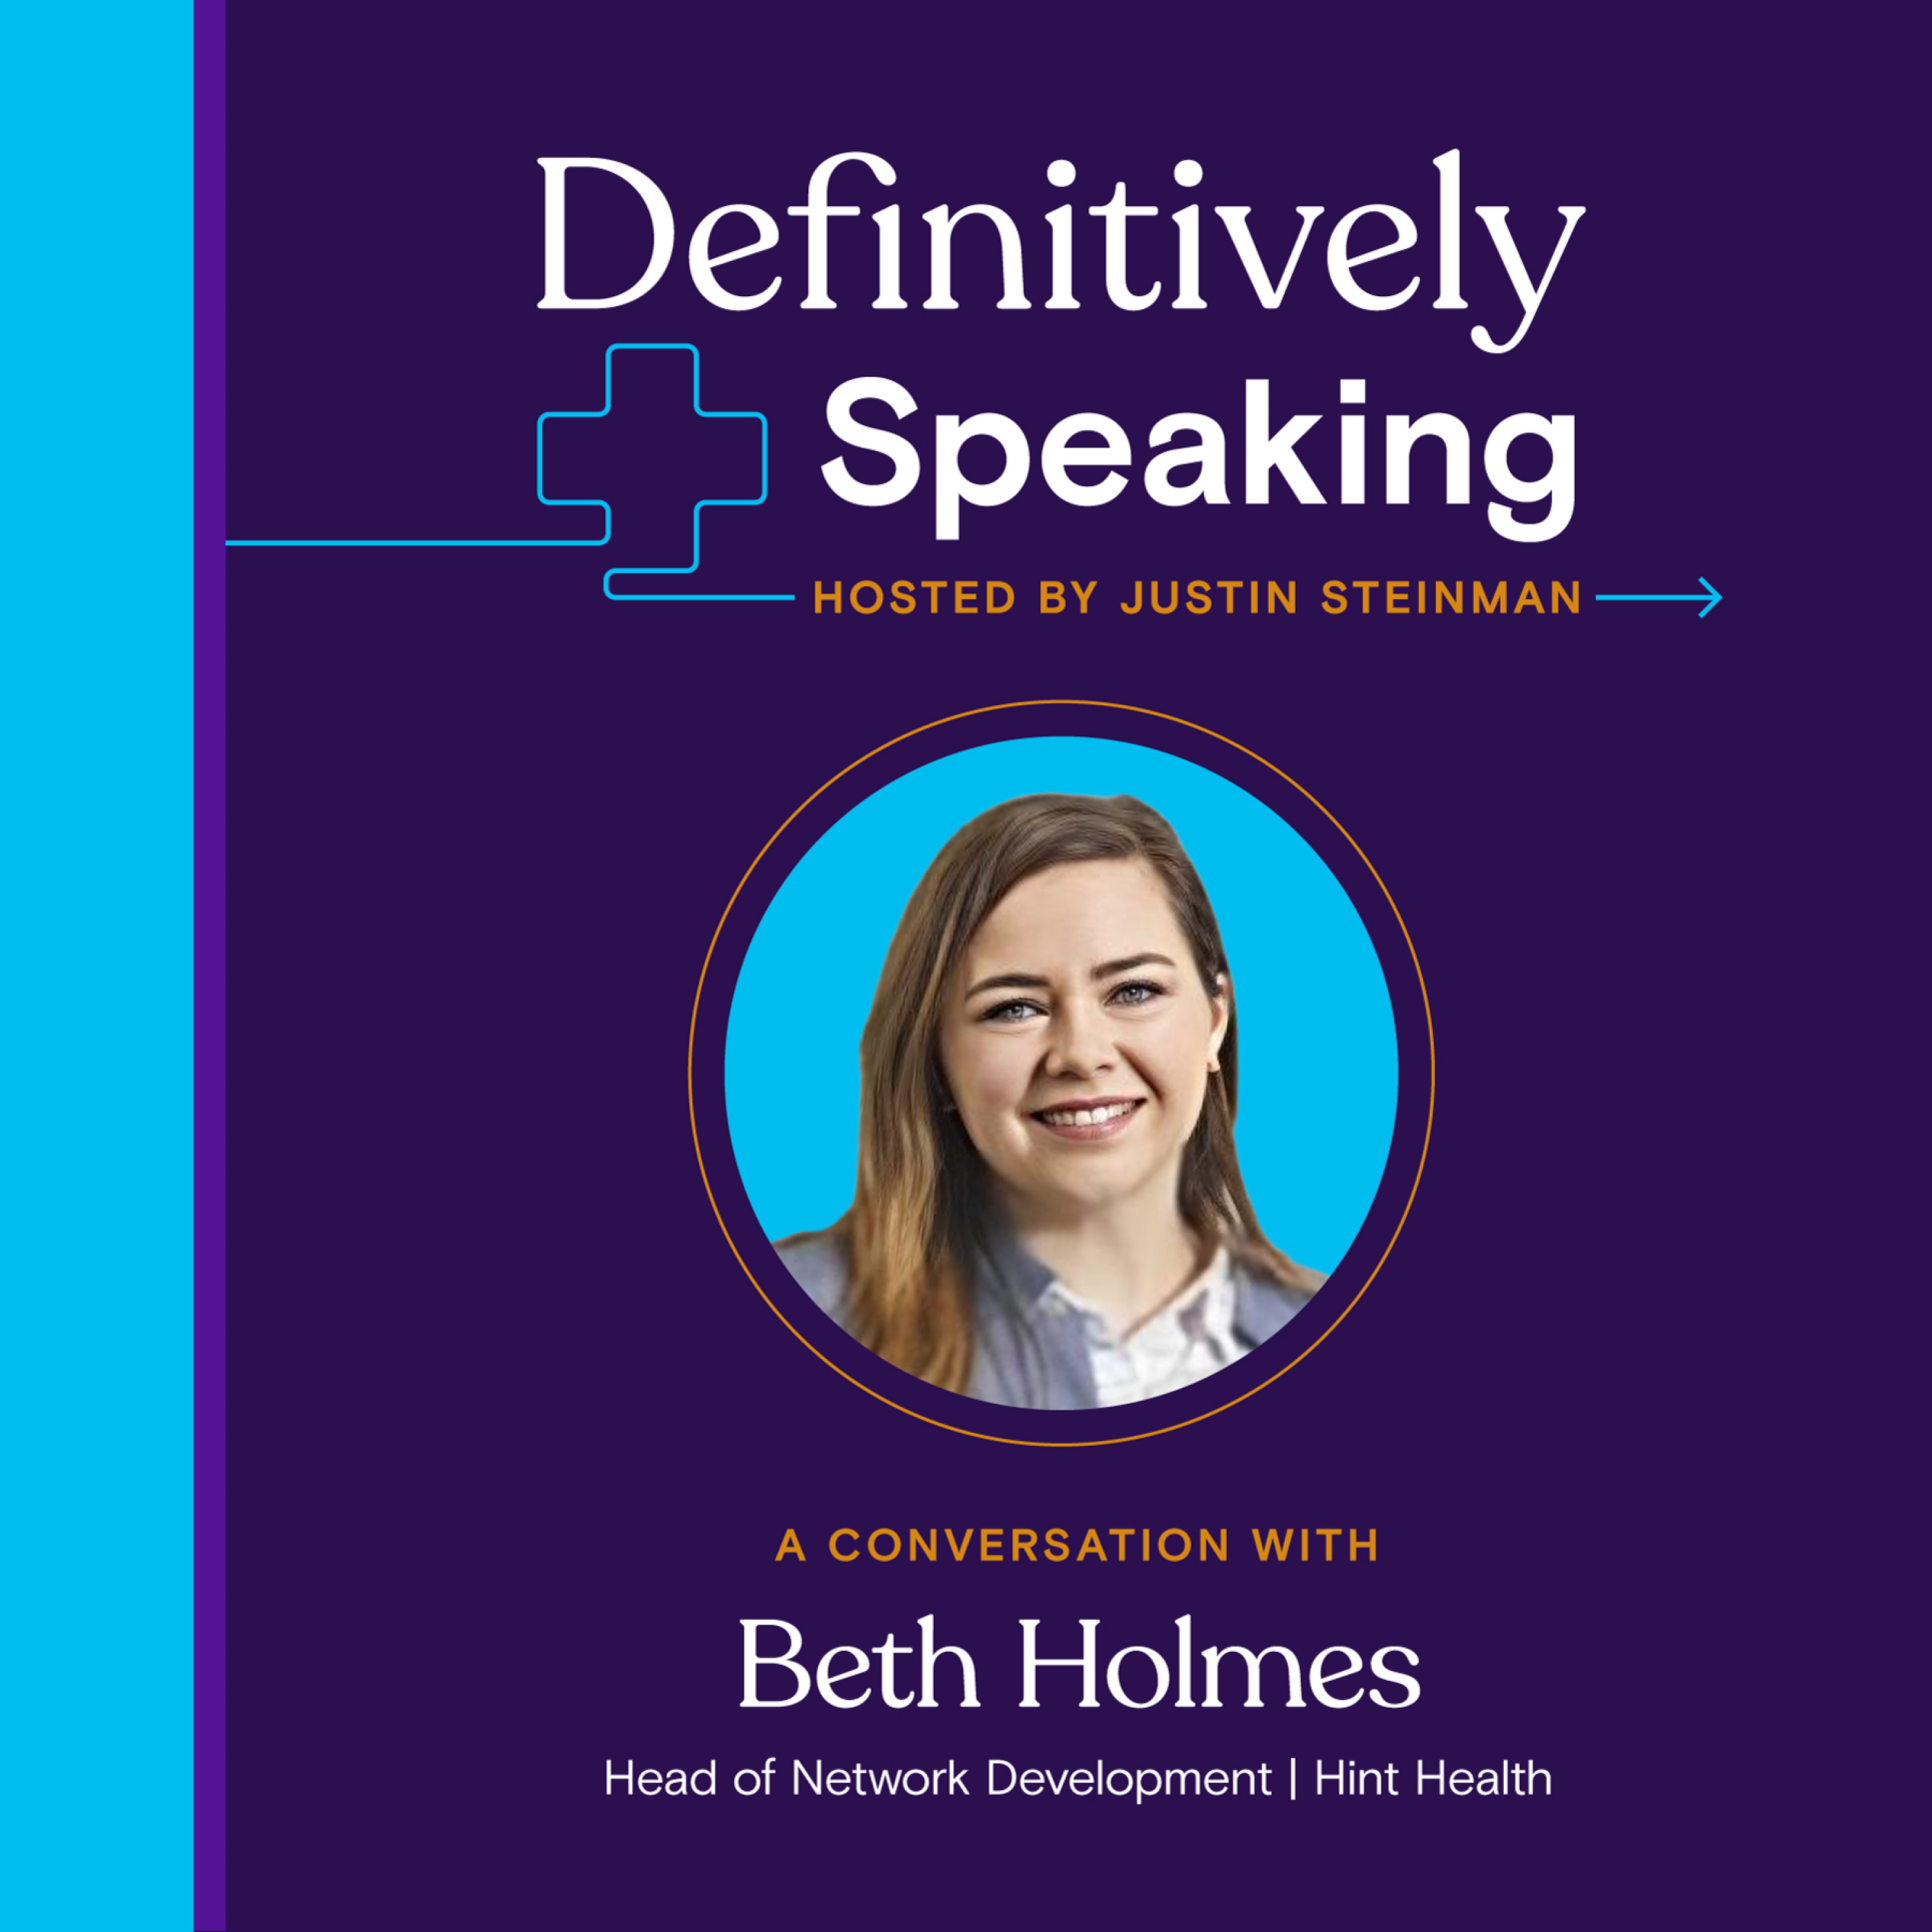 Episode 14: Going old school with your doctor – Exploring Direct Primary Care with Beth Holmes of Hint Health